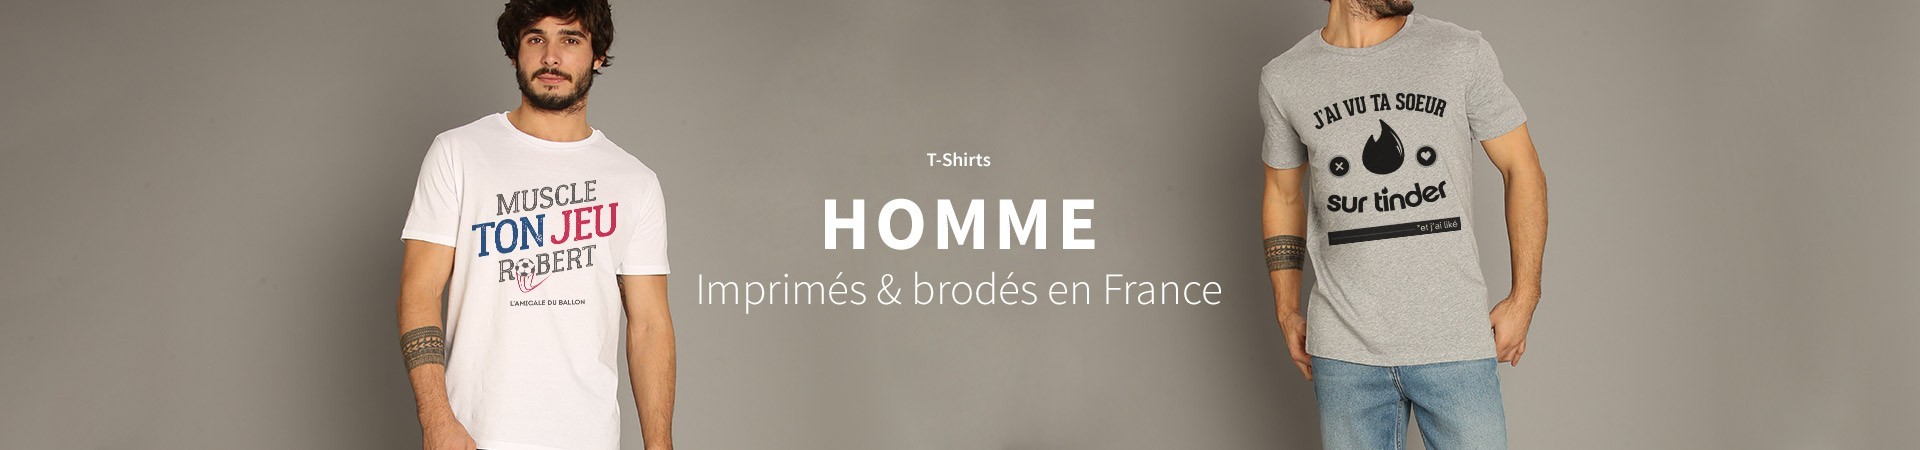 T-Shirts Homme